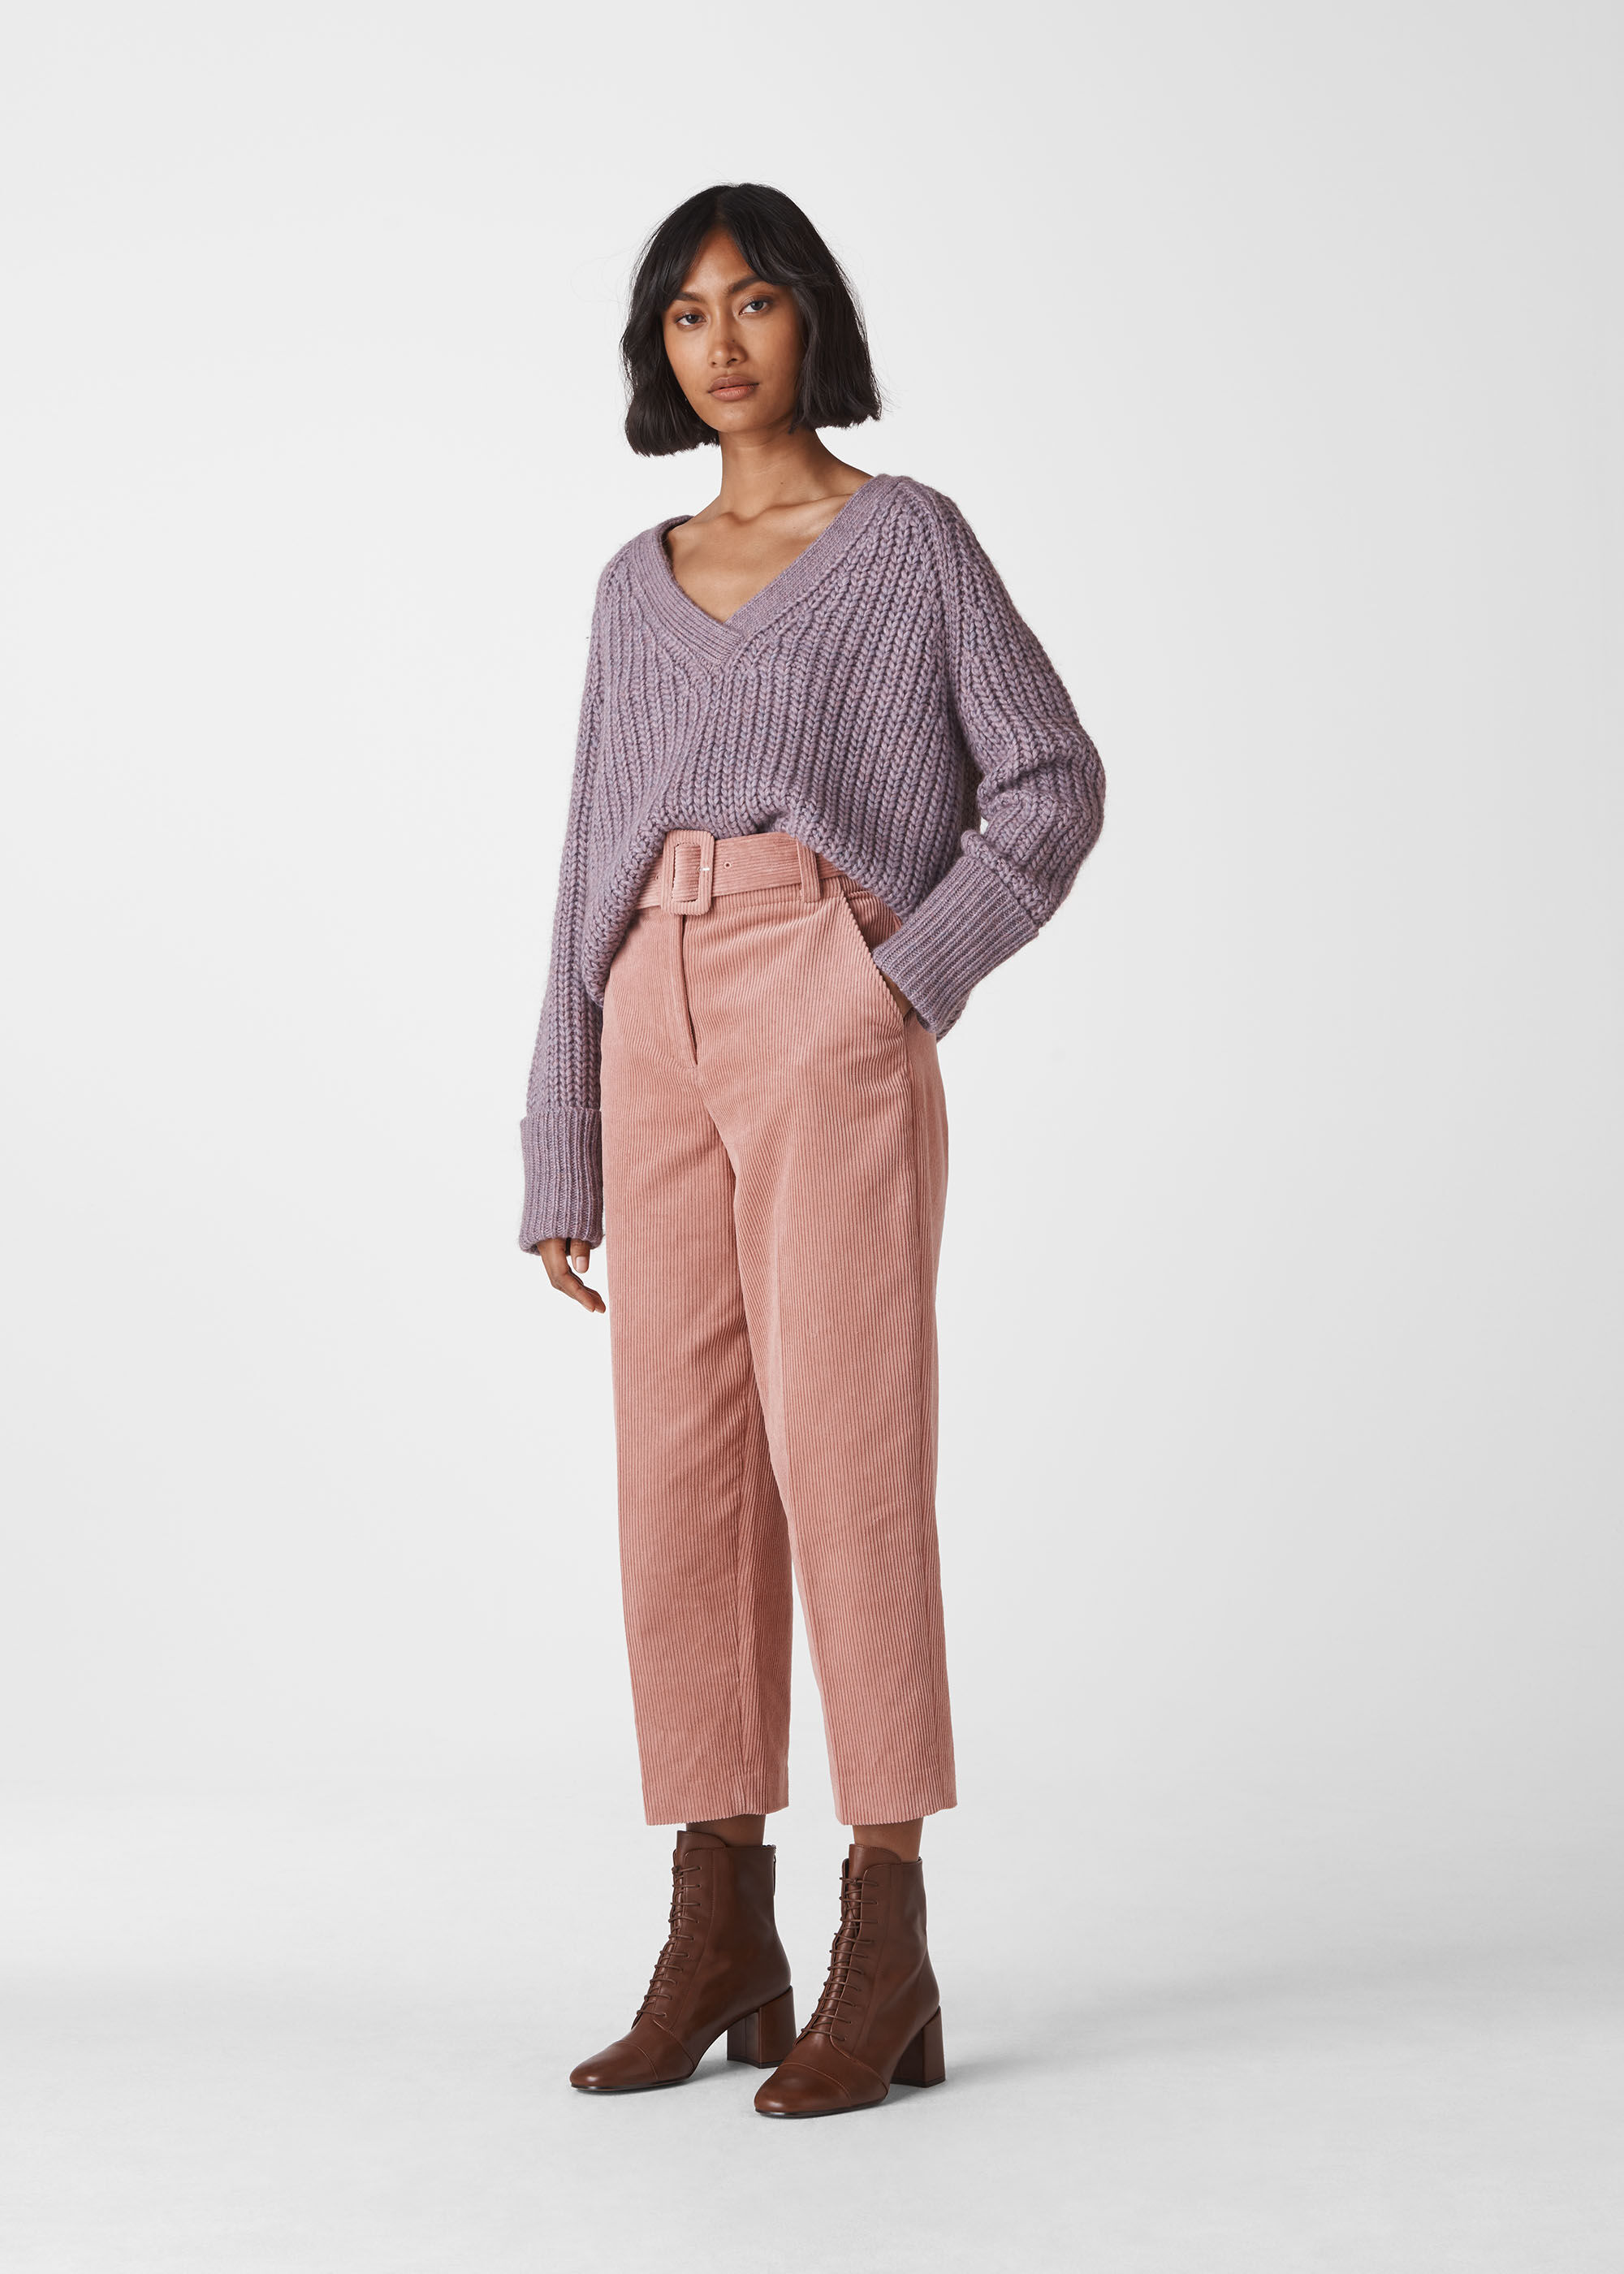 Ivy Pink Belted High Waist Trousers  Missy Empire  MISSYEMPIRE